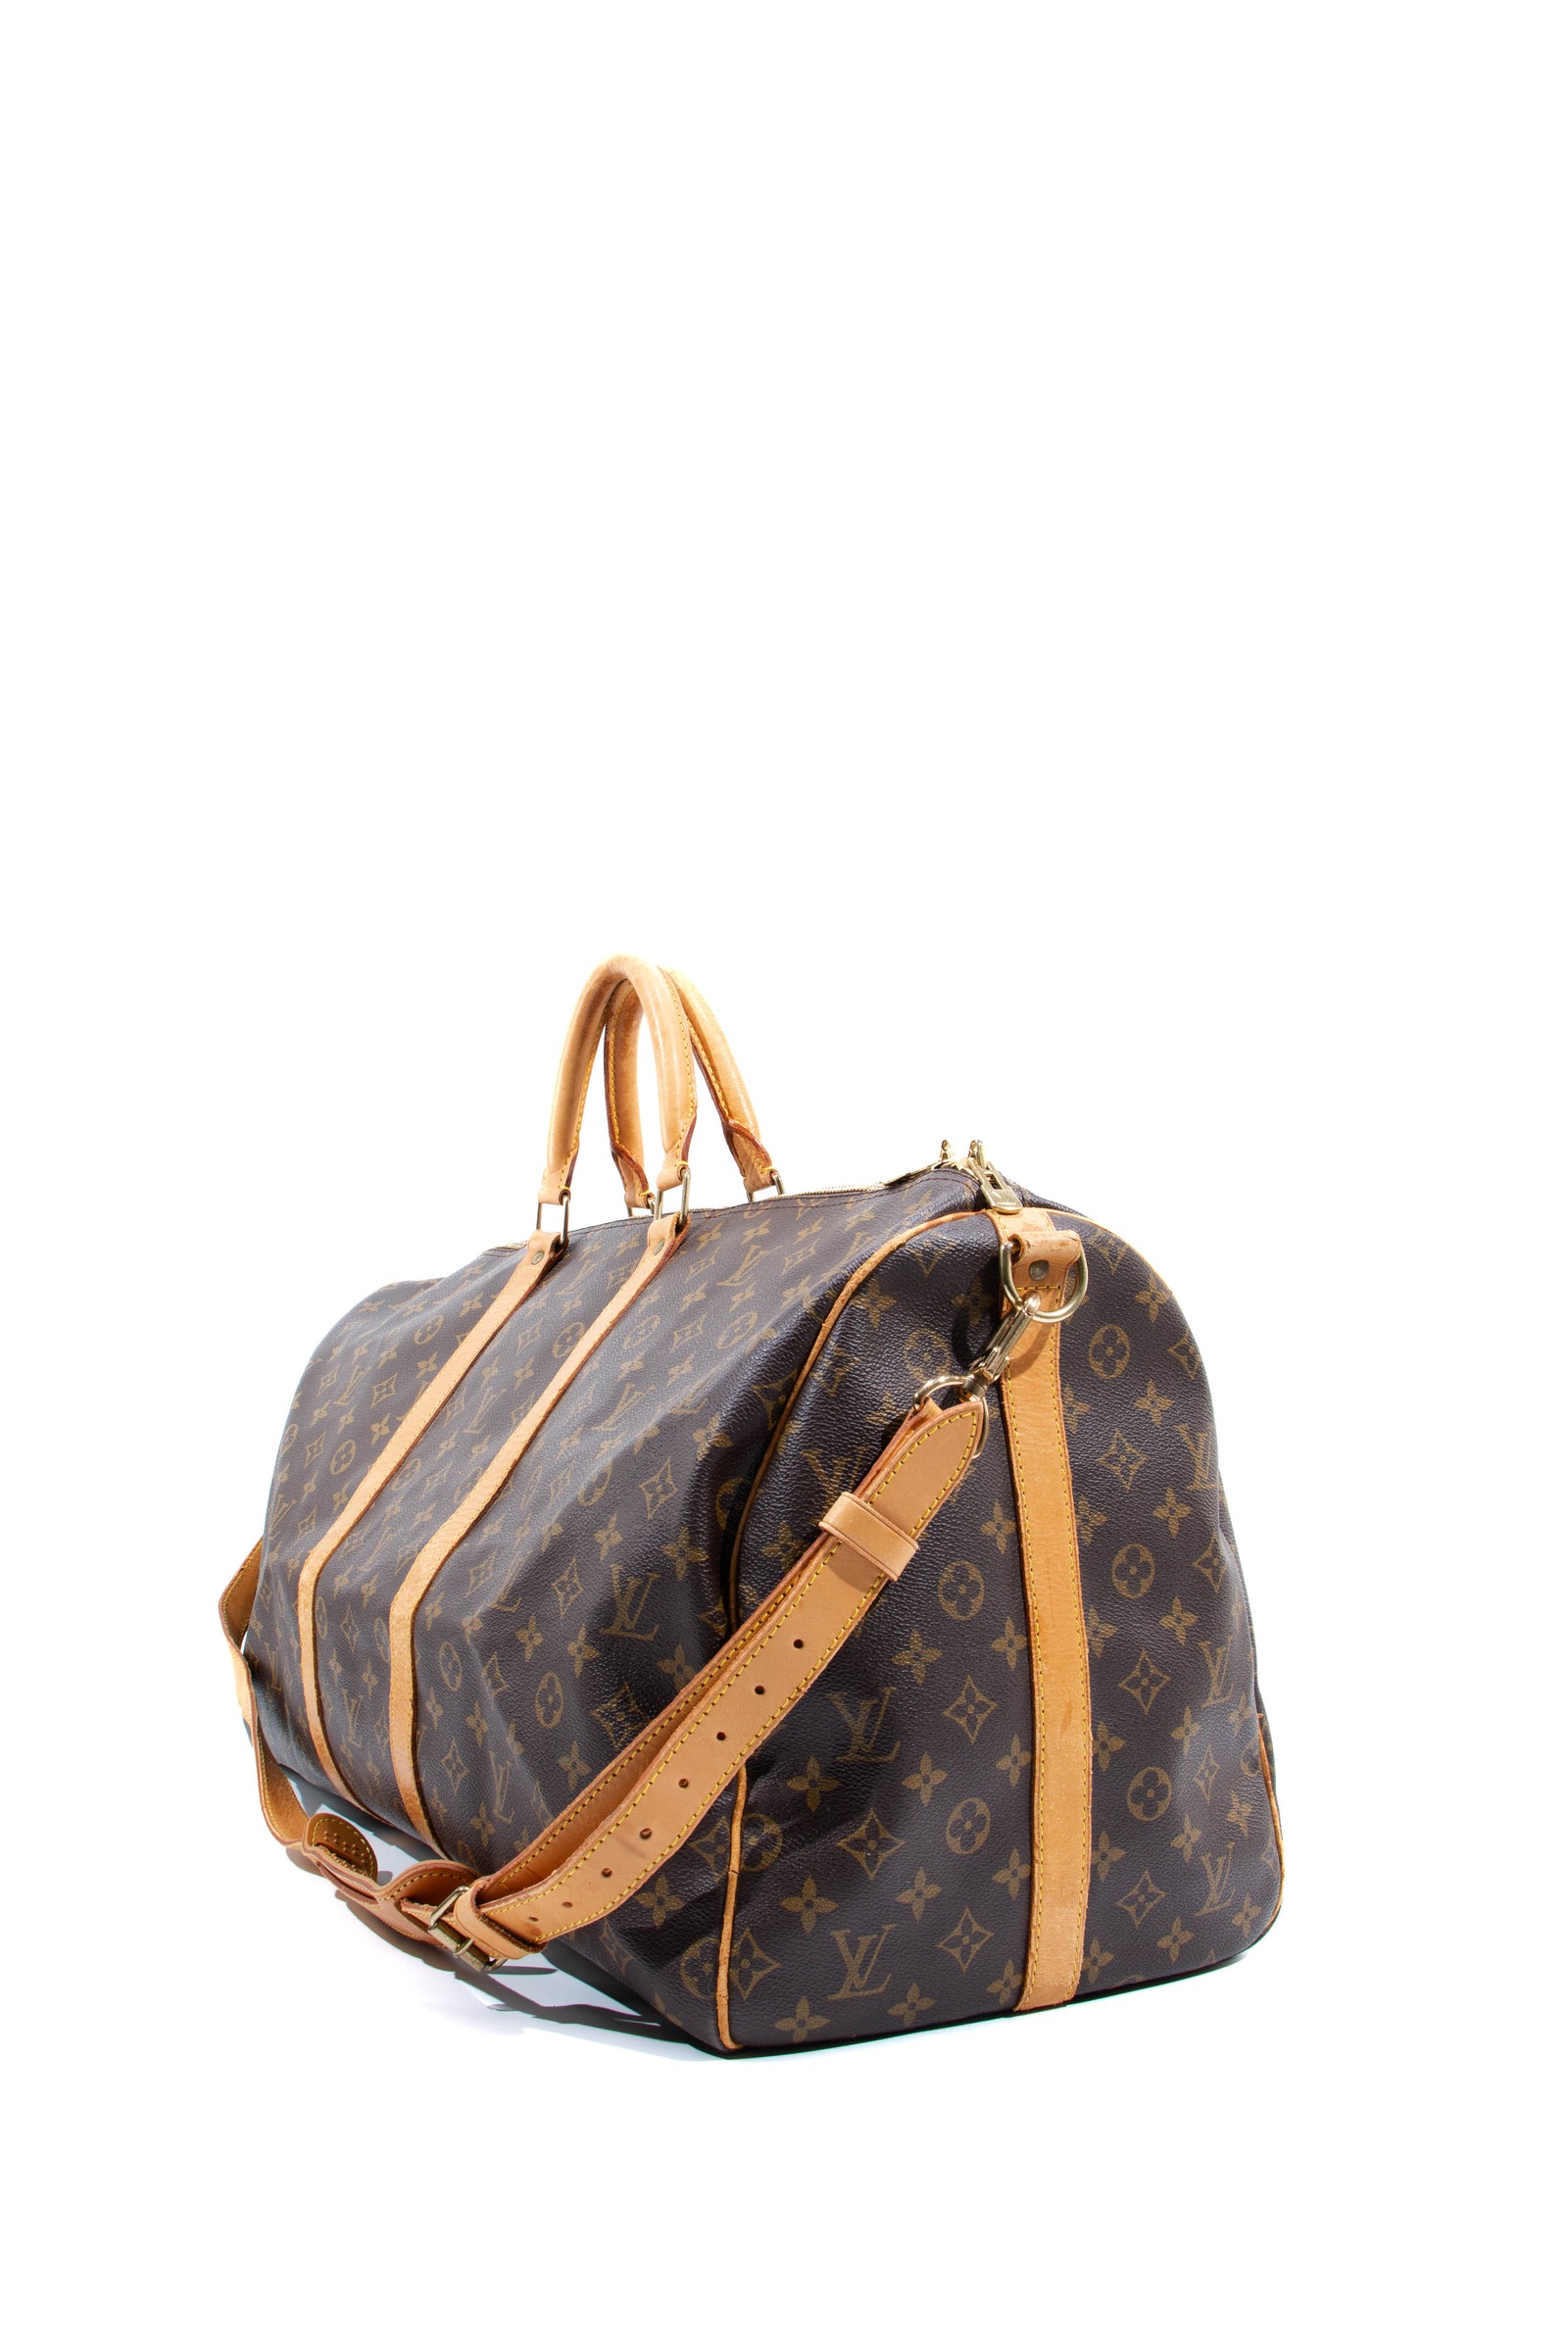 Bags Briefcases Louis Vuitton LV Upside Down Apollo Backpack